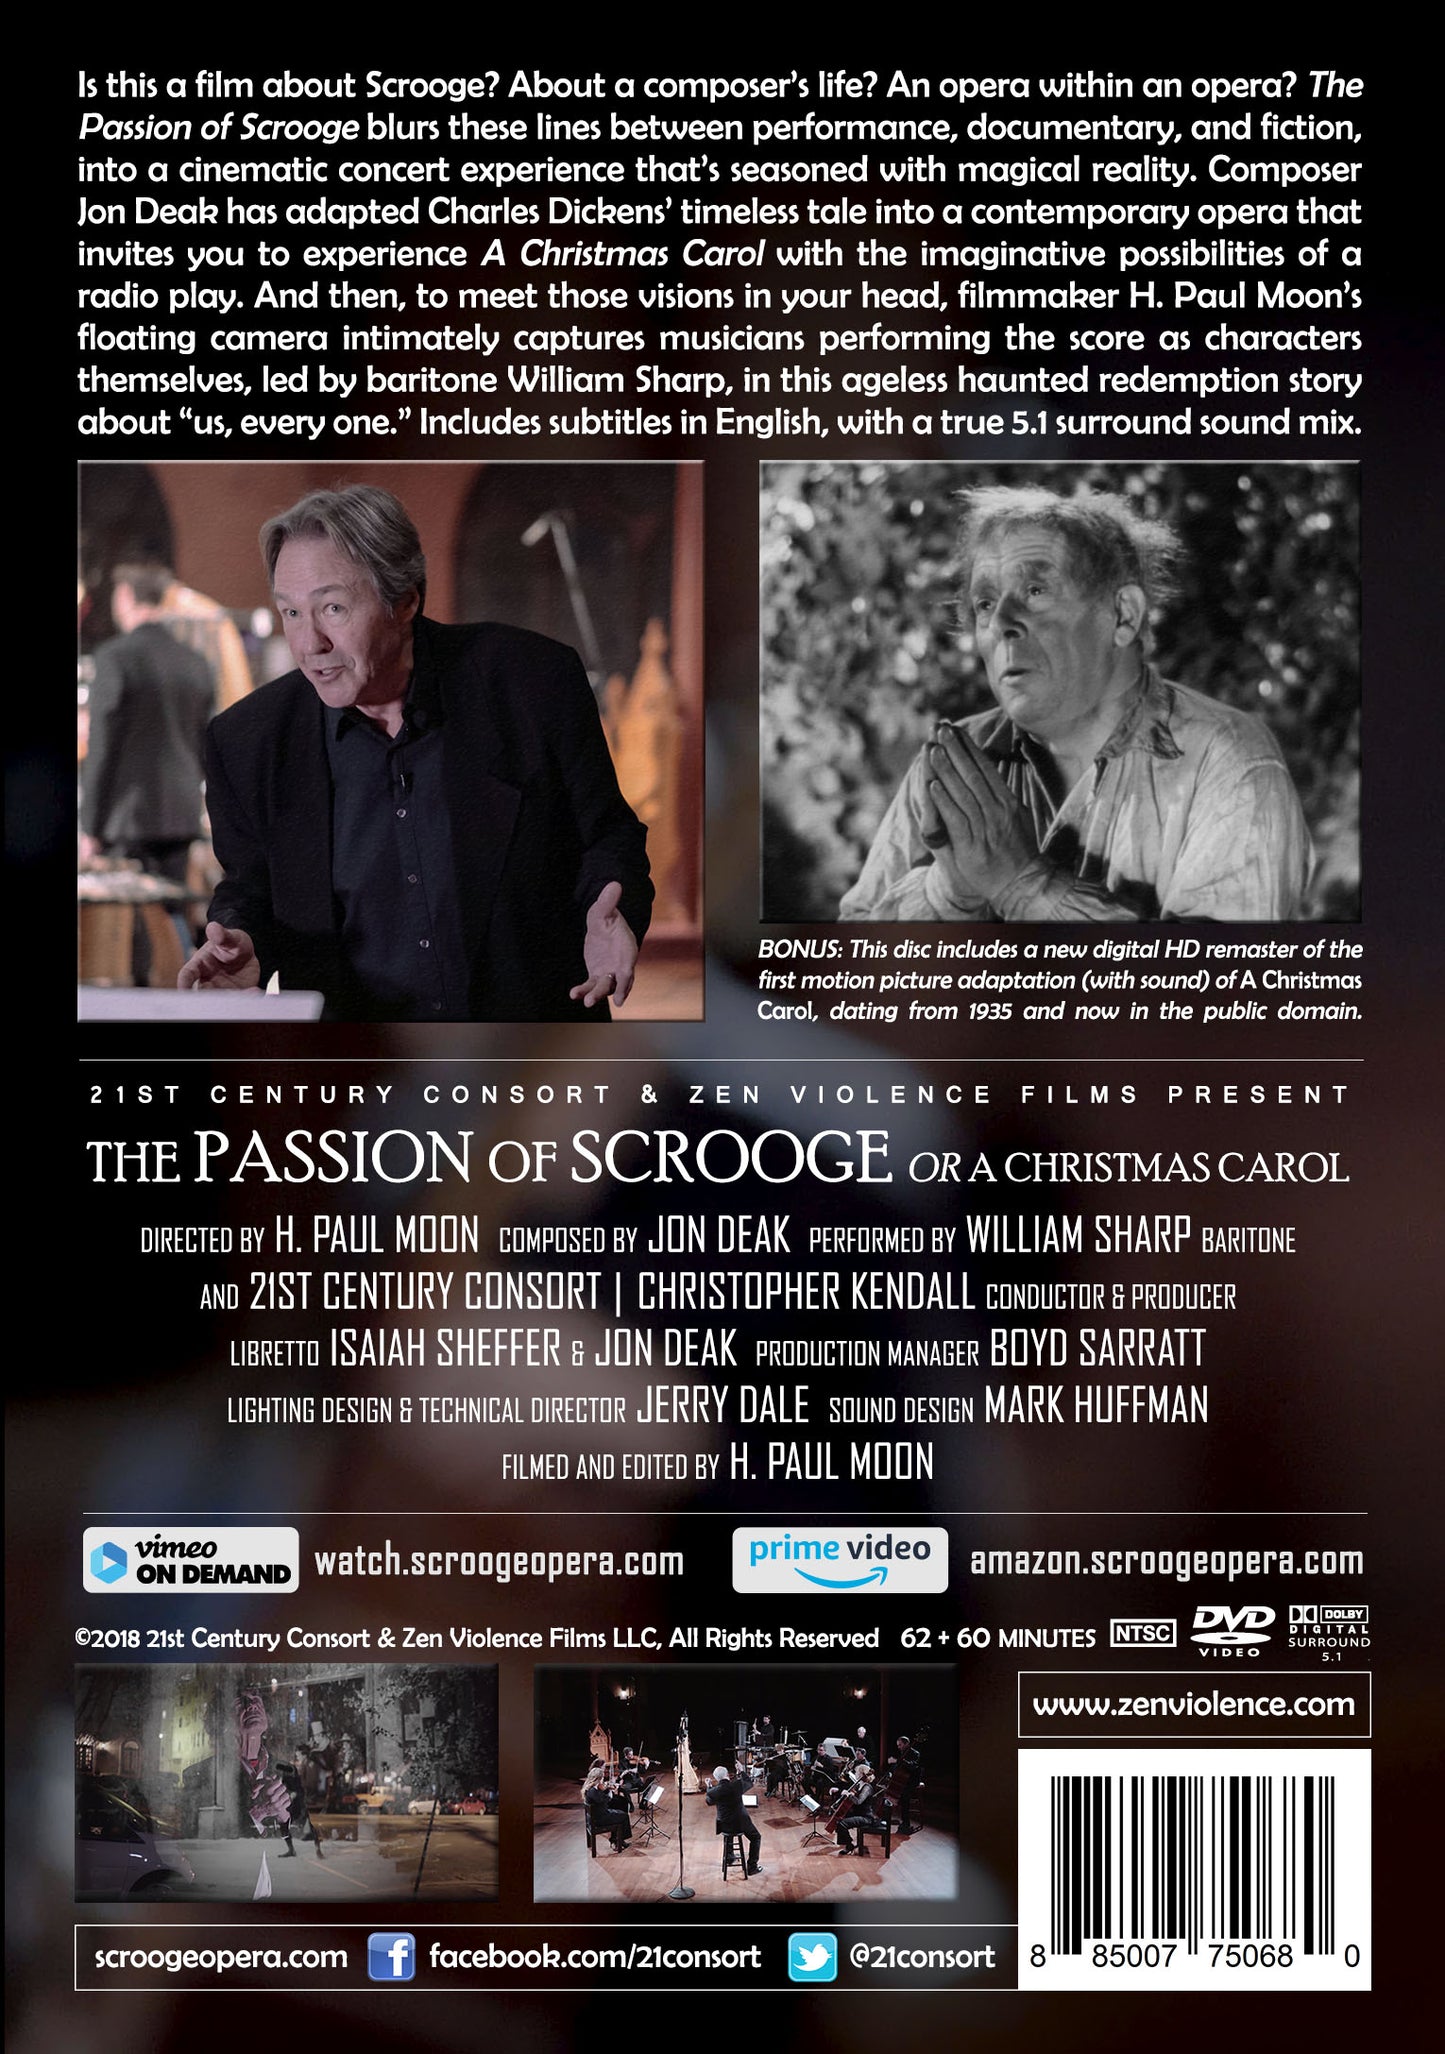 The Passion of Scrooge (DVD)